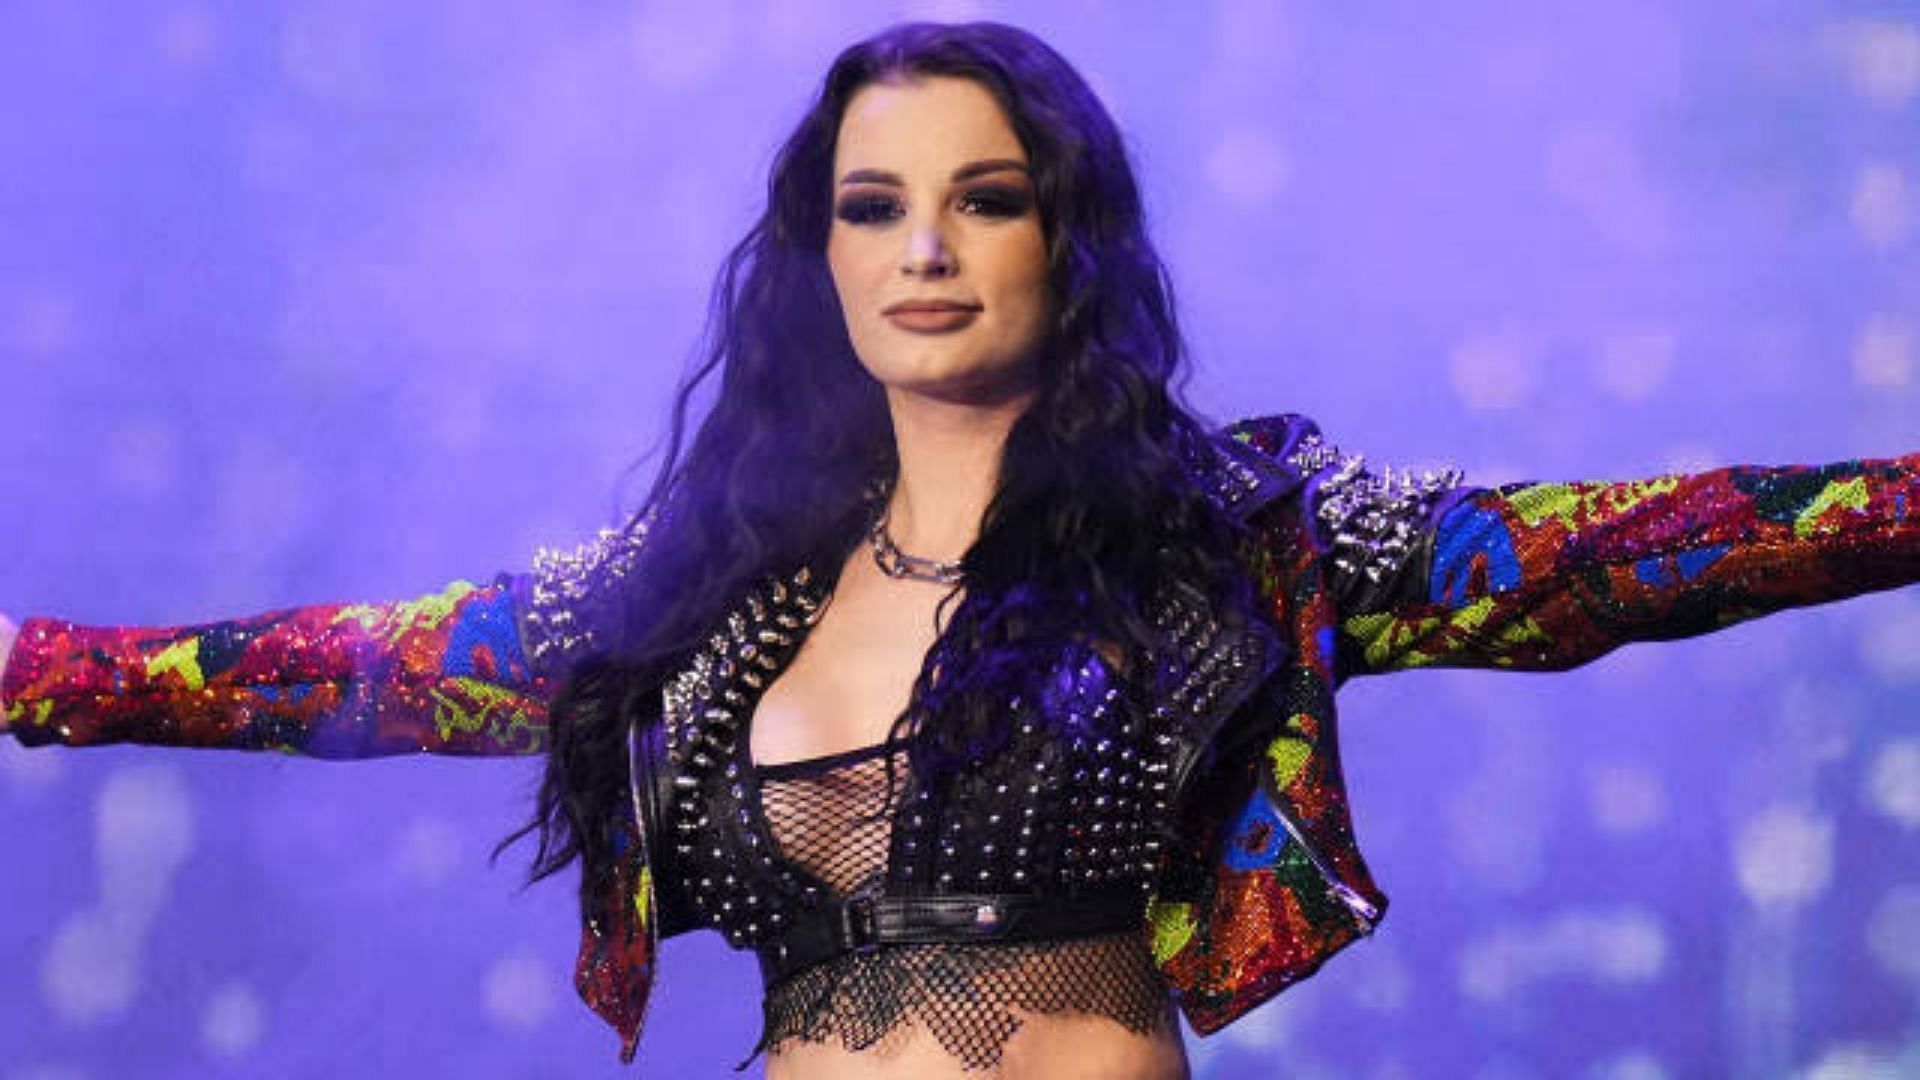 Saraya is a member of The Outcasts in AEW.